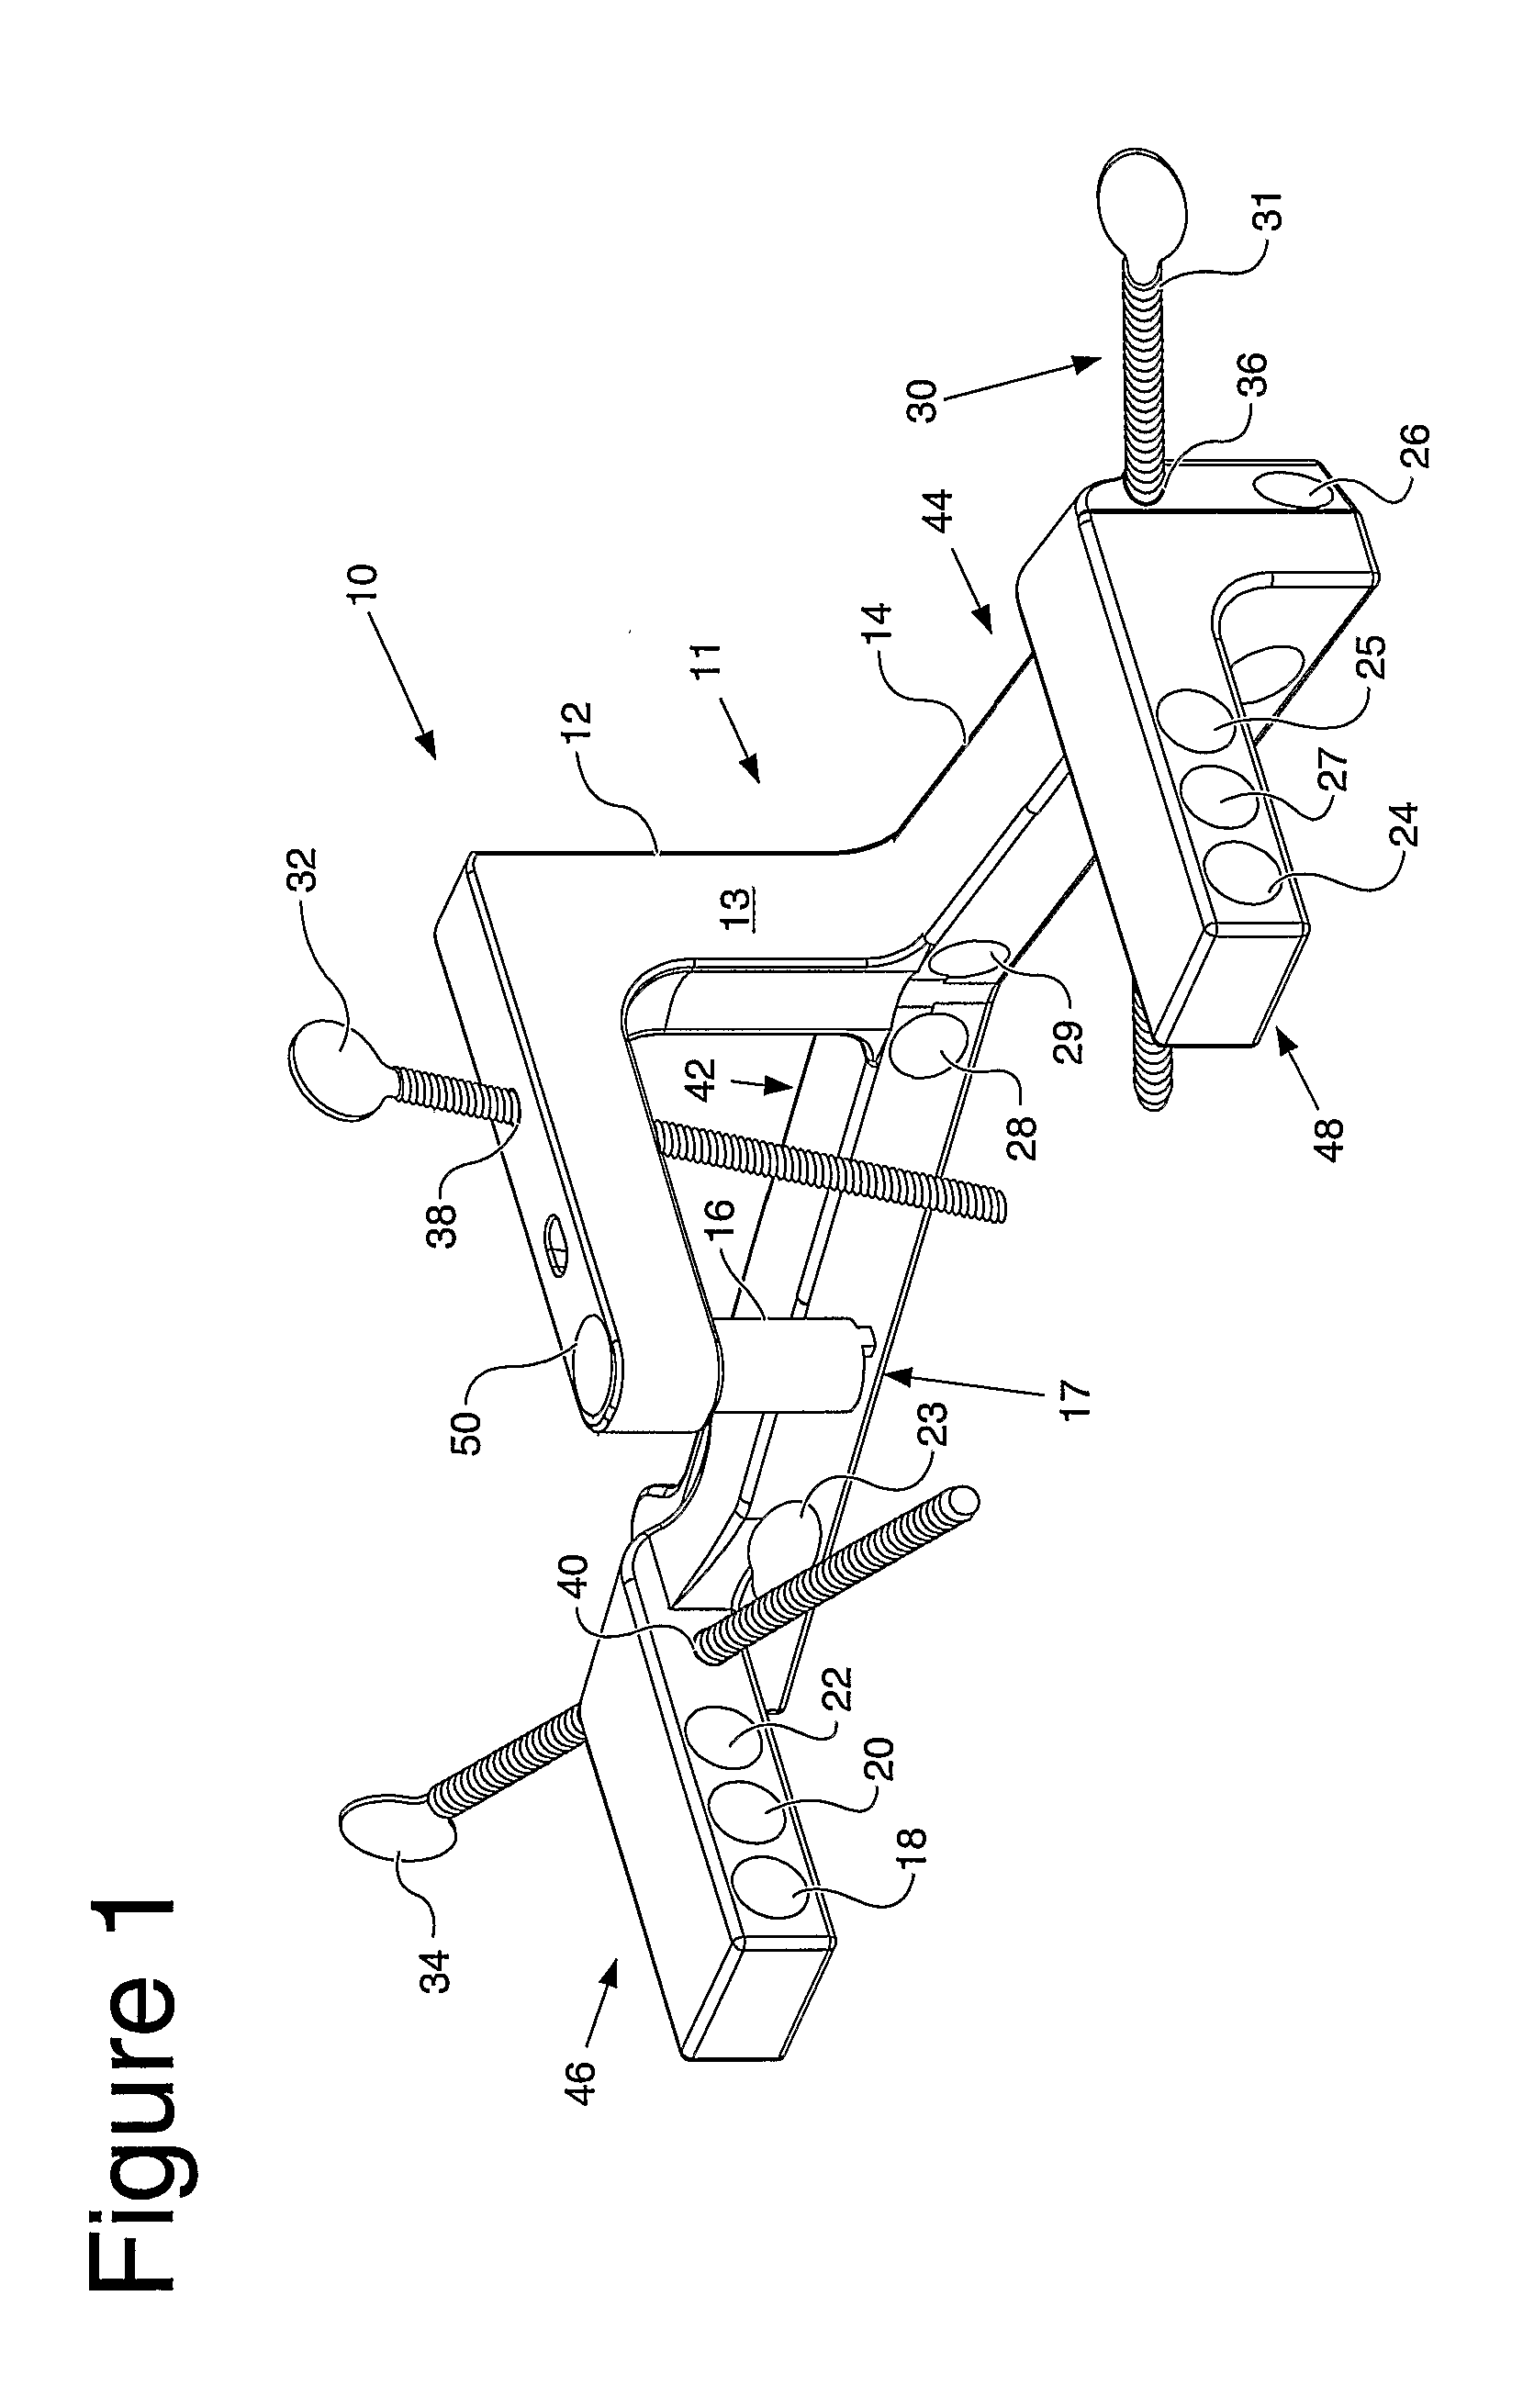 Instrument for Fracture Fragment Alignment and Stabilization